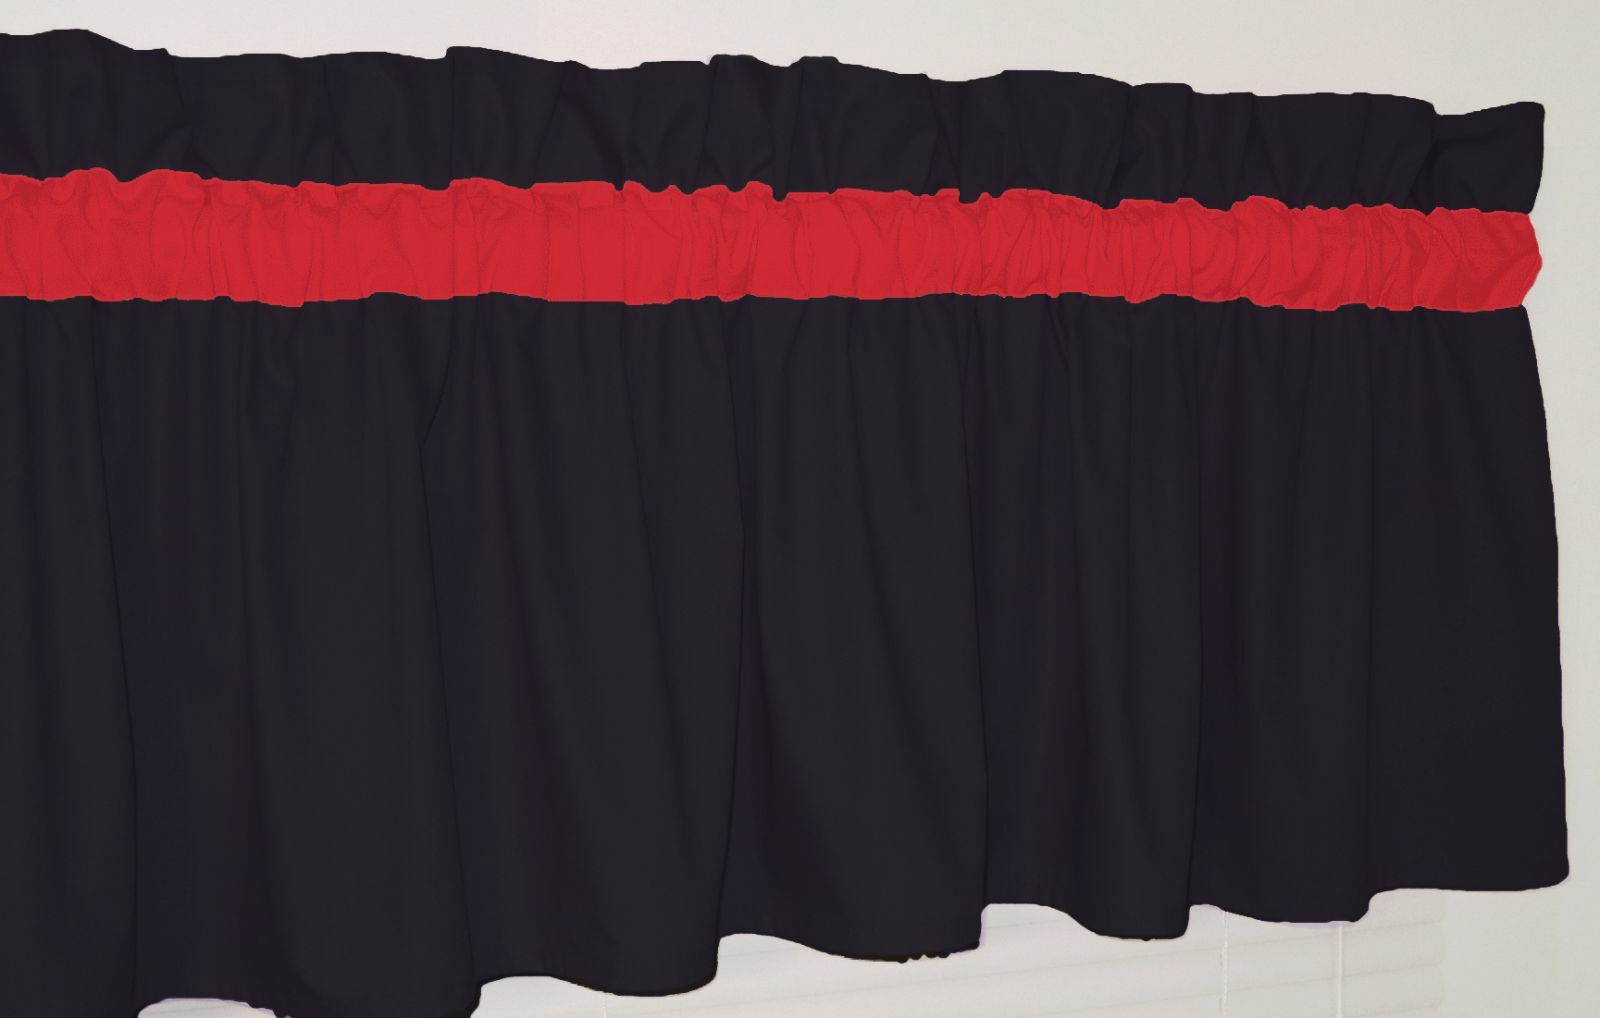 Solid Black And Red Curtain Valance Window Topper Bedroom School Dorm Team Color